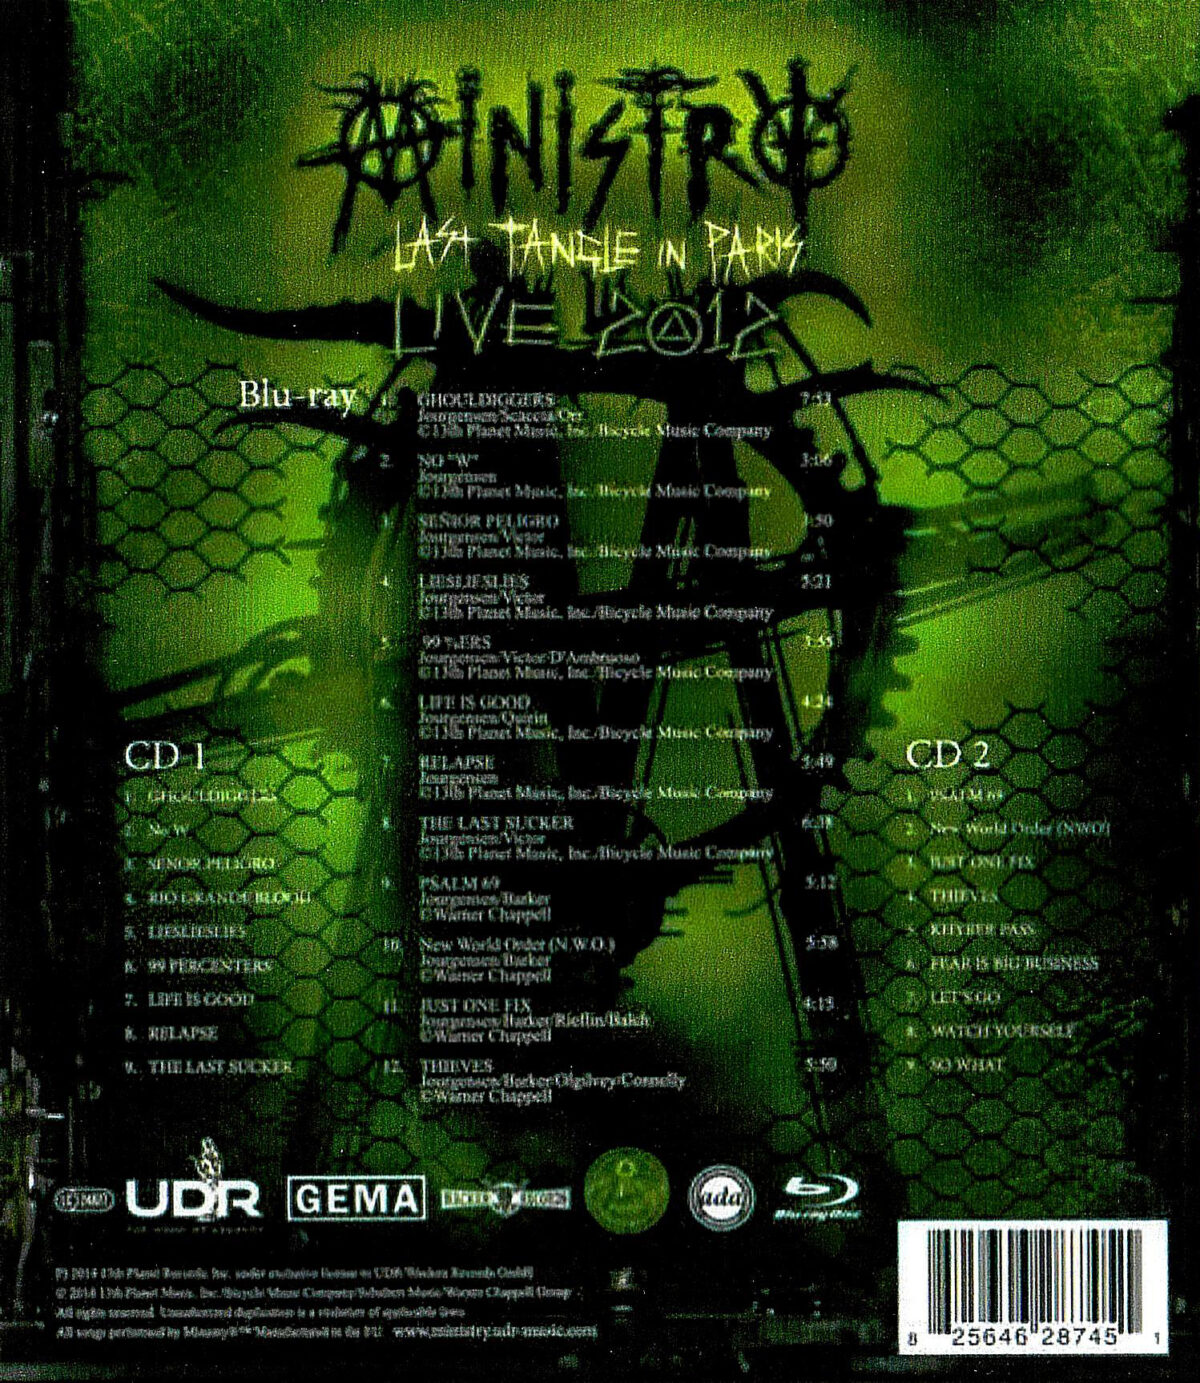 Ministry - Last Tangle In Paris Live 2012 2CDs+1BLURAY